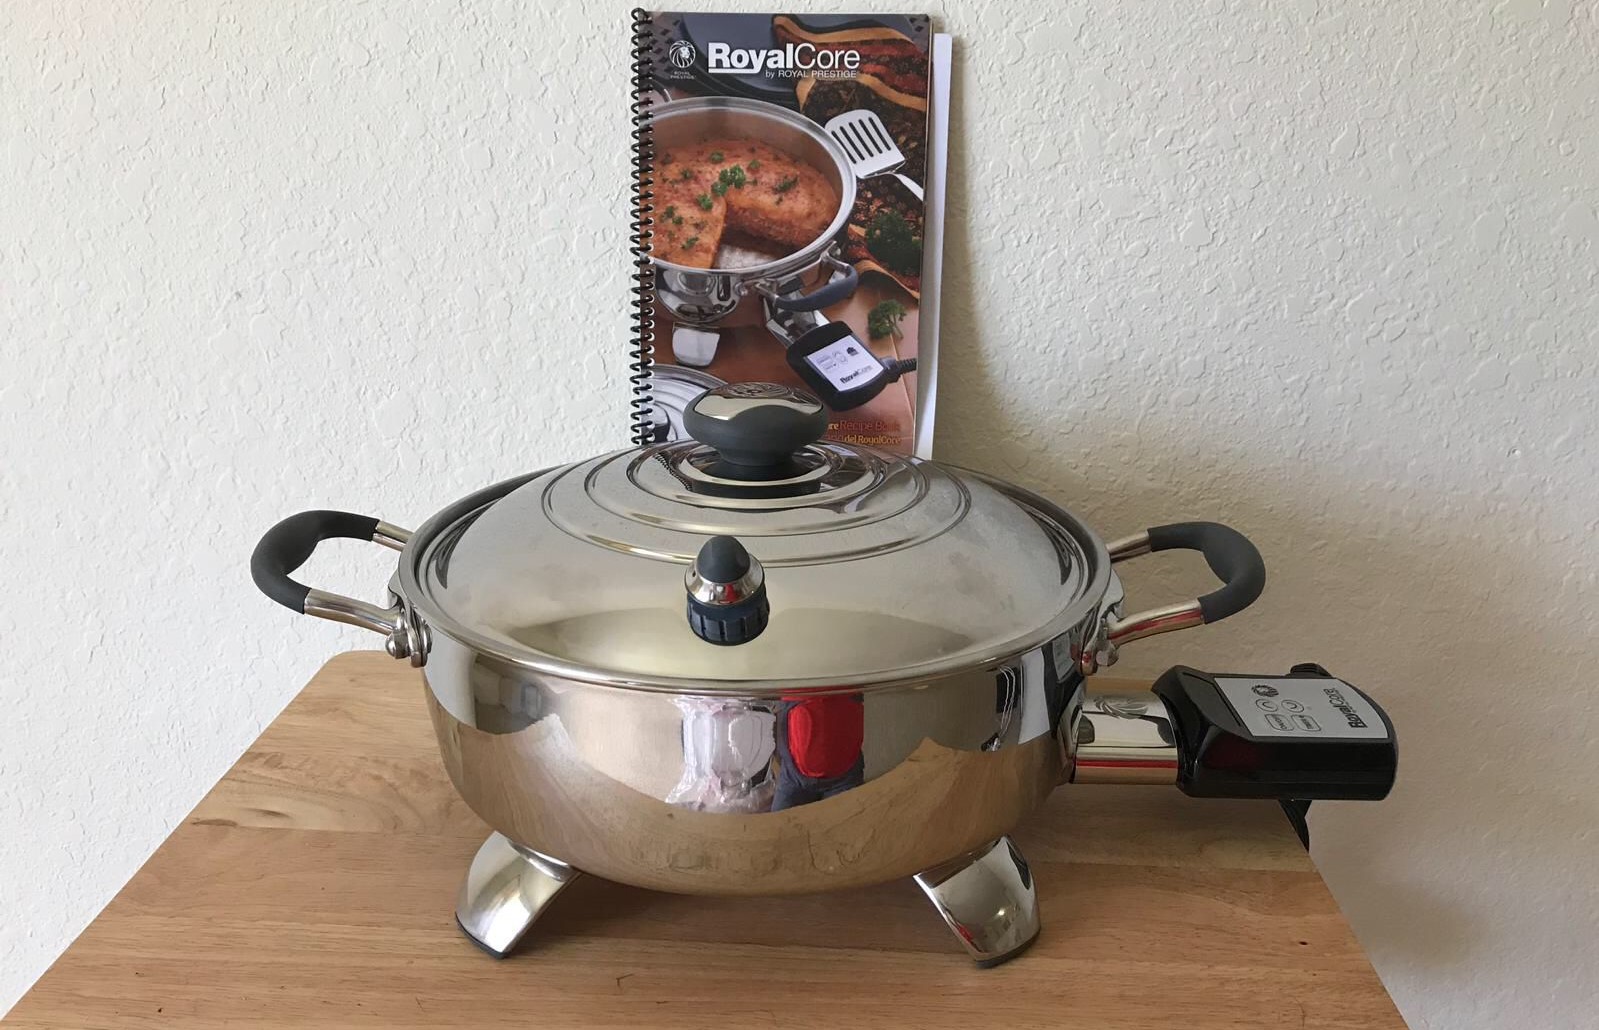 https://storables.com/wp-content/uploads/2023/07/how-to-cook-rice-royal-core-electric-skillet-1690121760.jpg